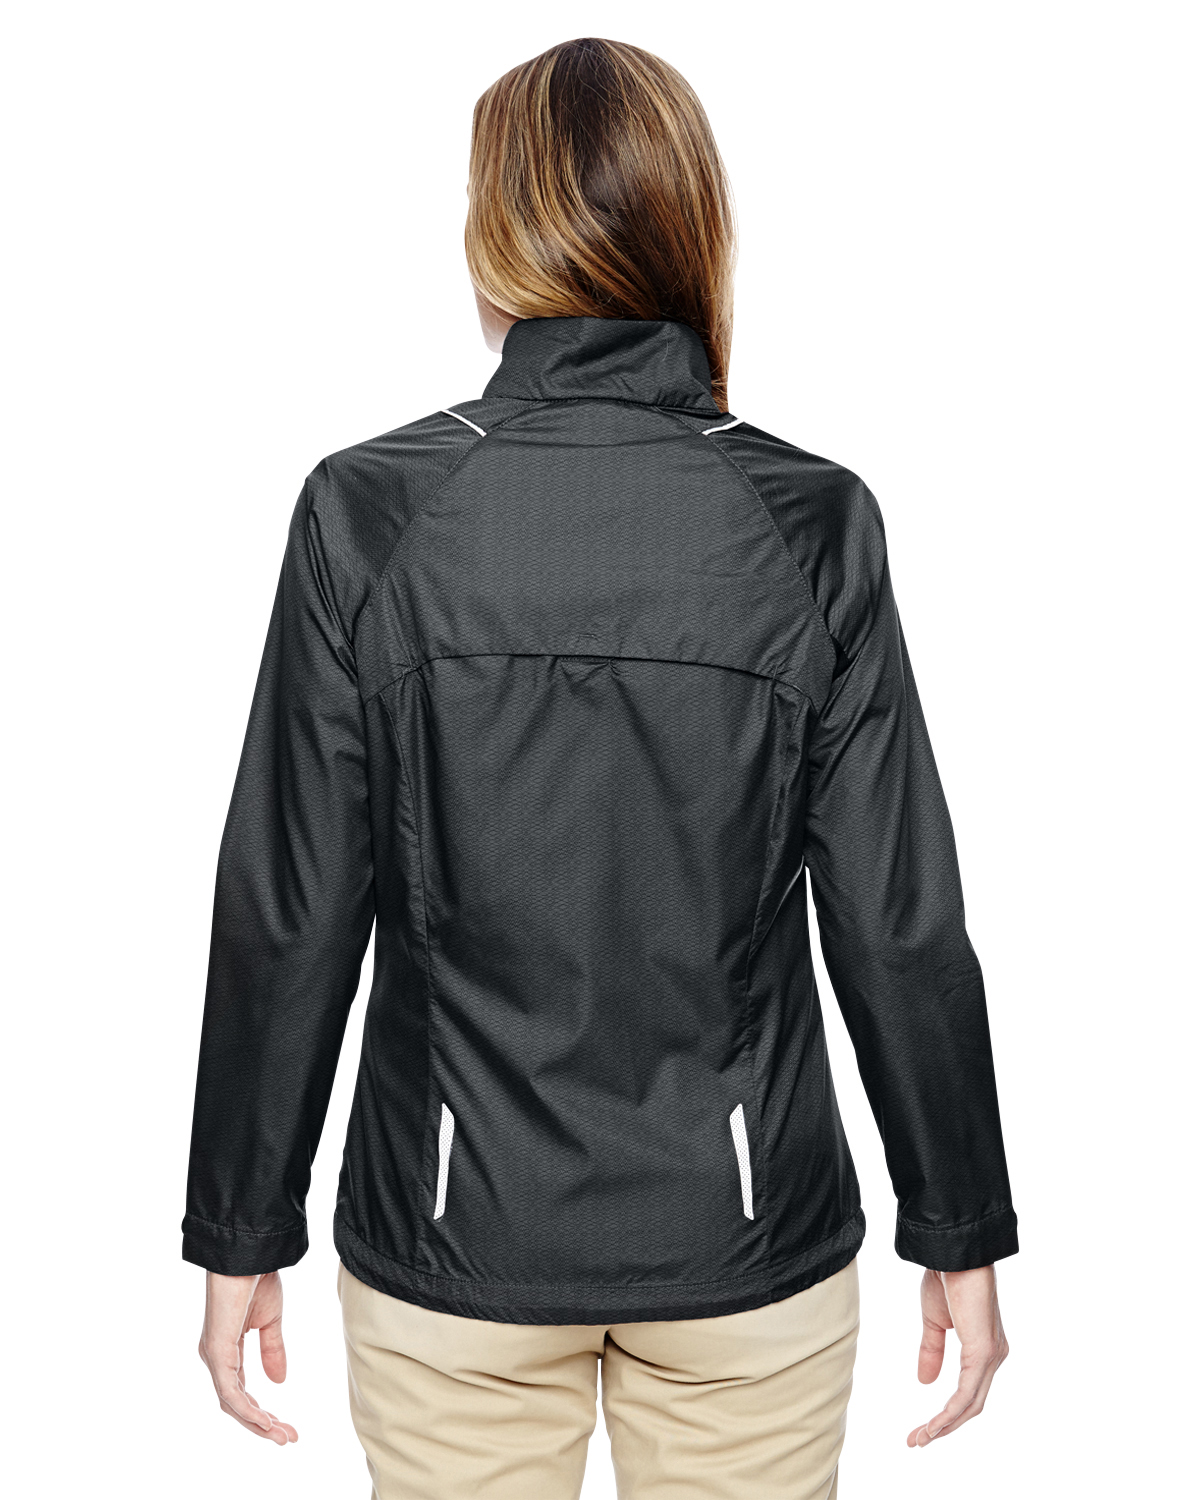 A Product of Ash City - North End Ladies' Sustain Lightweight Recycled Polyester Dobby Jacket with&nbsp;Print - CARBON 456 - S [Saving and Discount on bulk, Code Christo] - image 2 of 2